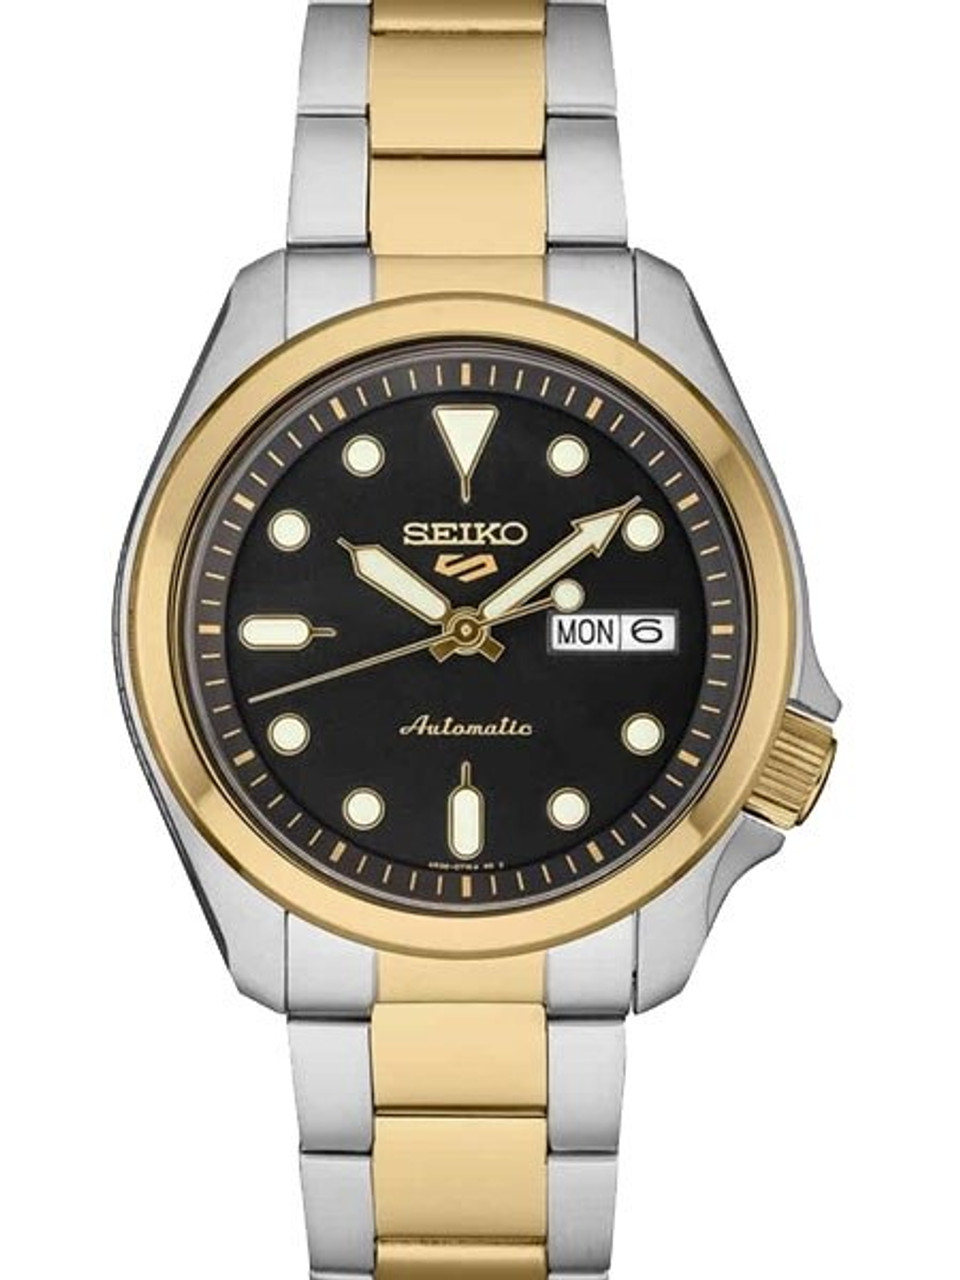 Seiko 5 Sports Two-Tone Automatic 24-Jewel Watch with Black Dial #SRPE60